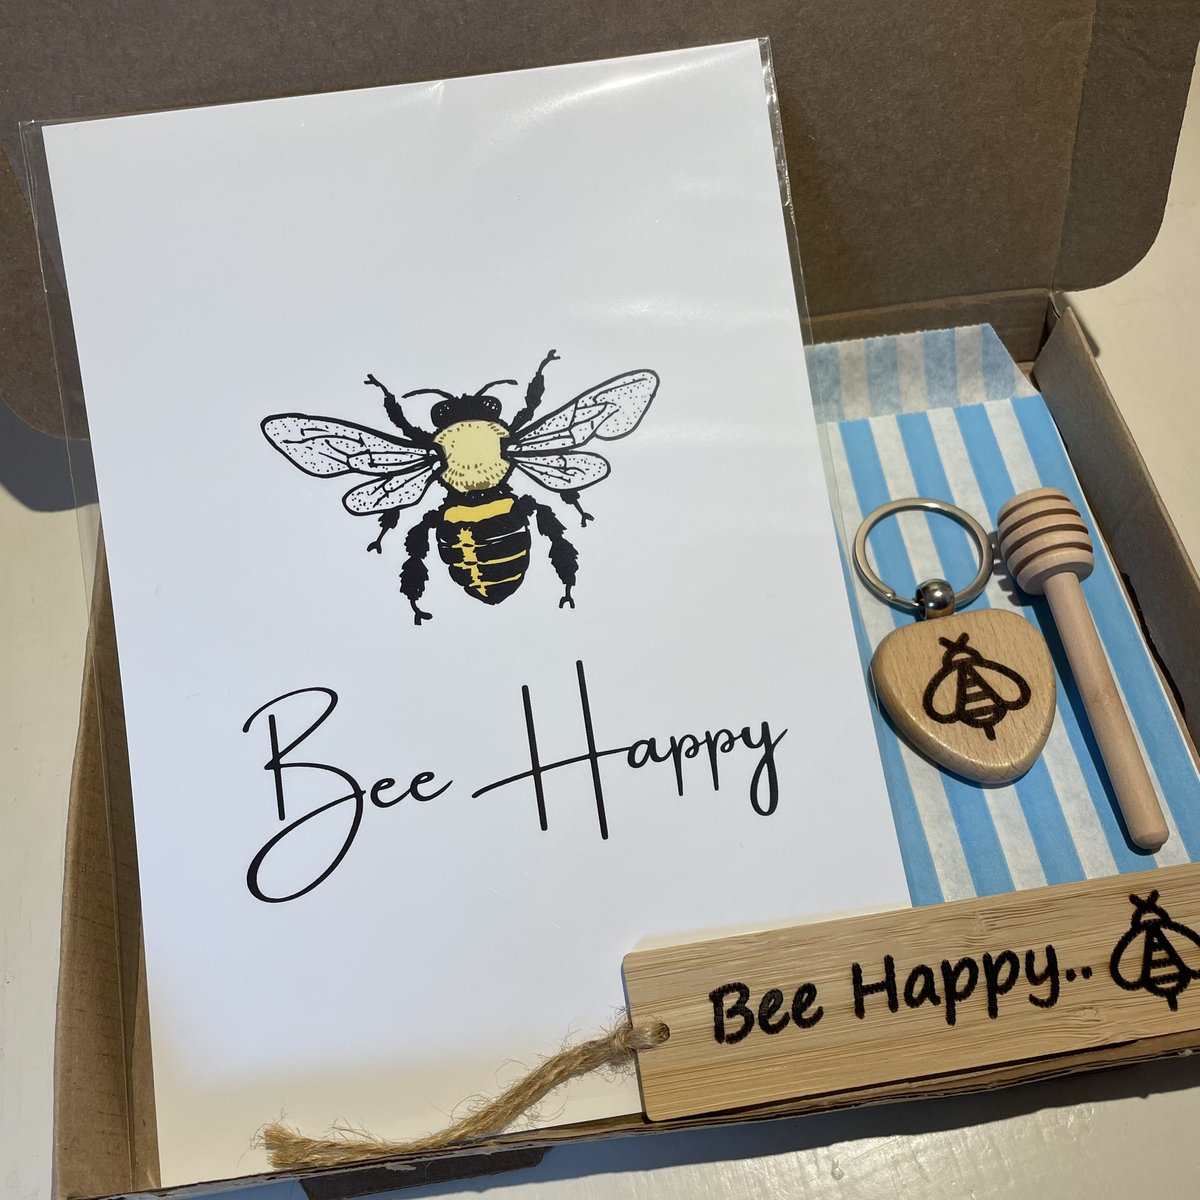 🐝🐝🐝 Bank Holiday Sale 🐝🐝🐝 Save 10% off all letterbox gift sets over on my Etsy shop until the end of May! 📮 littlenscrafts.etsy.com #EarlyBiz #EtsyUK #BeeHappy #TheCraftersUK #UKMakers #CraftBizParty